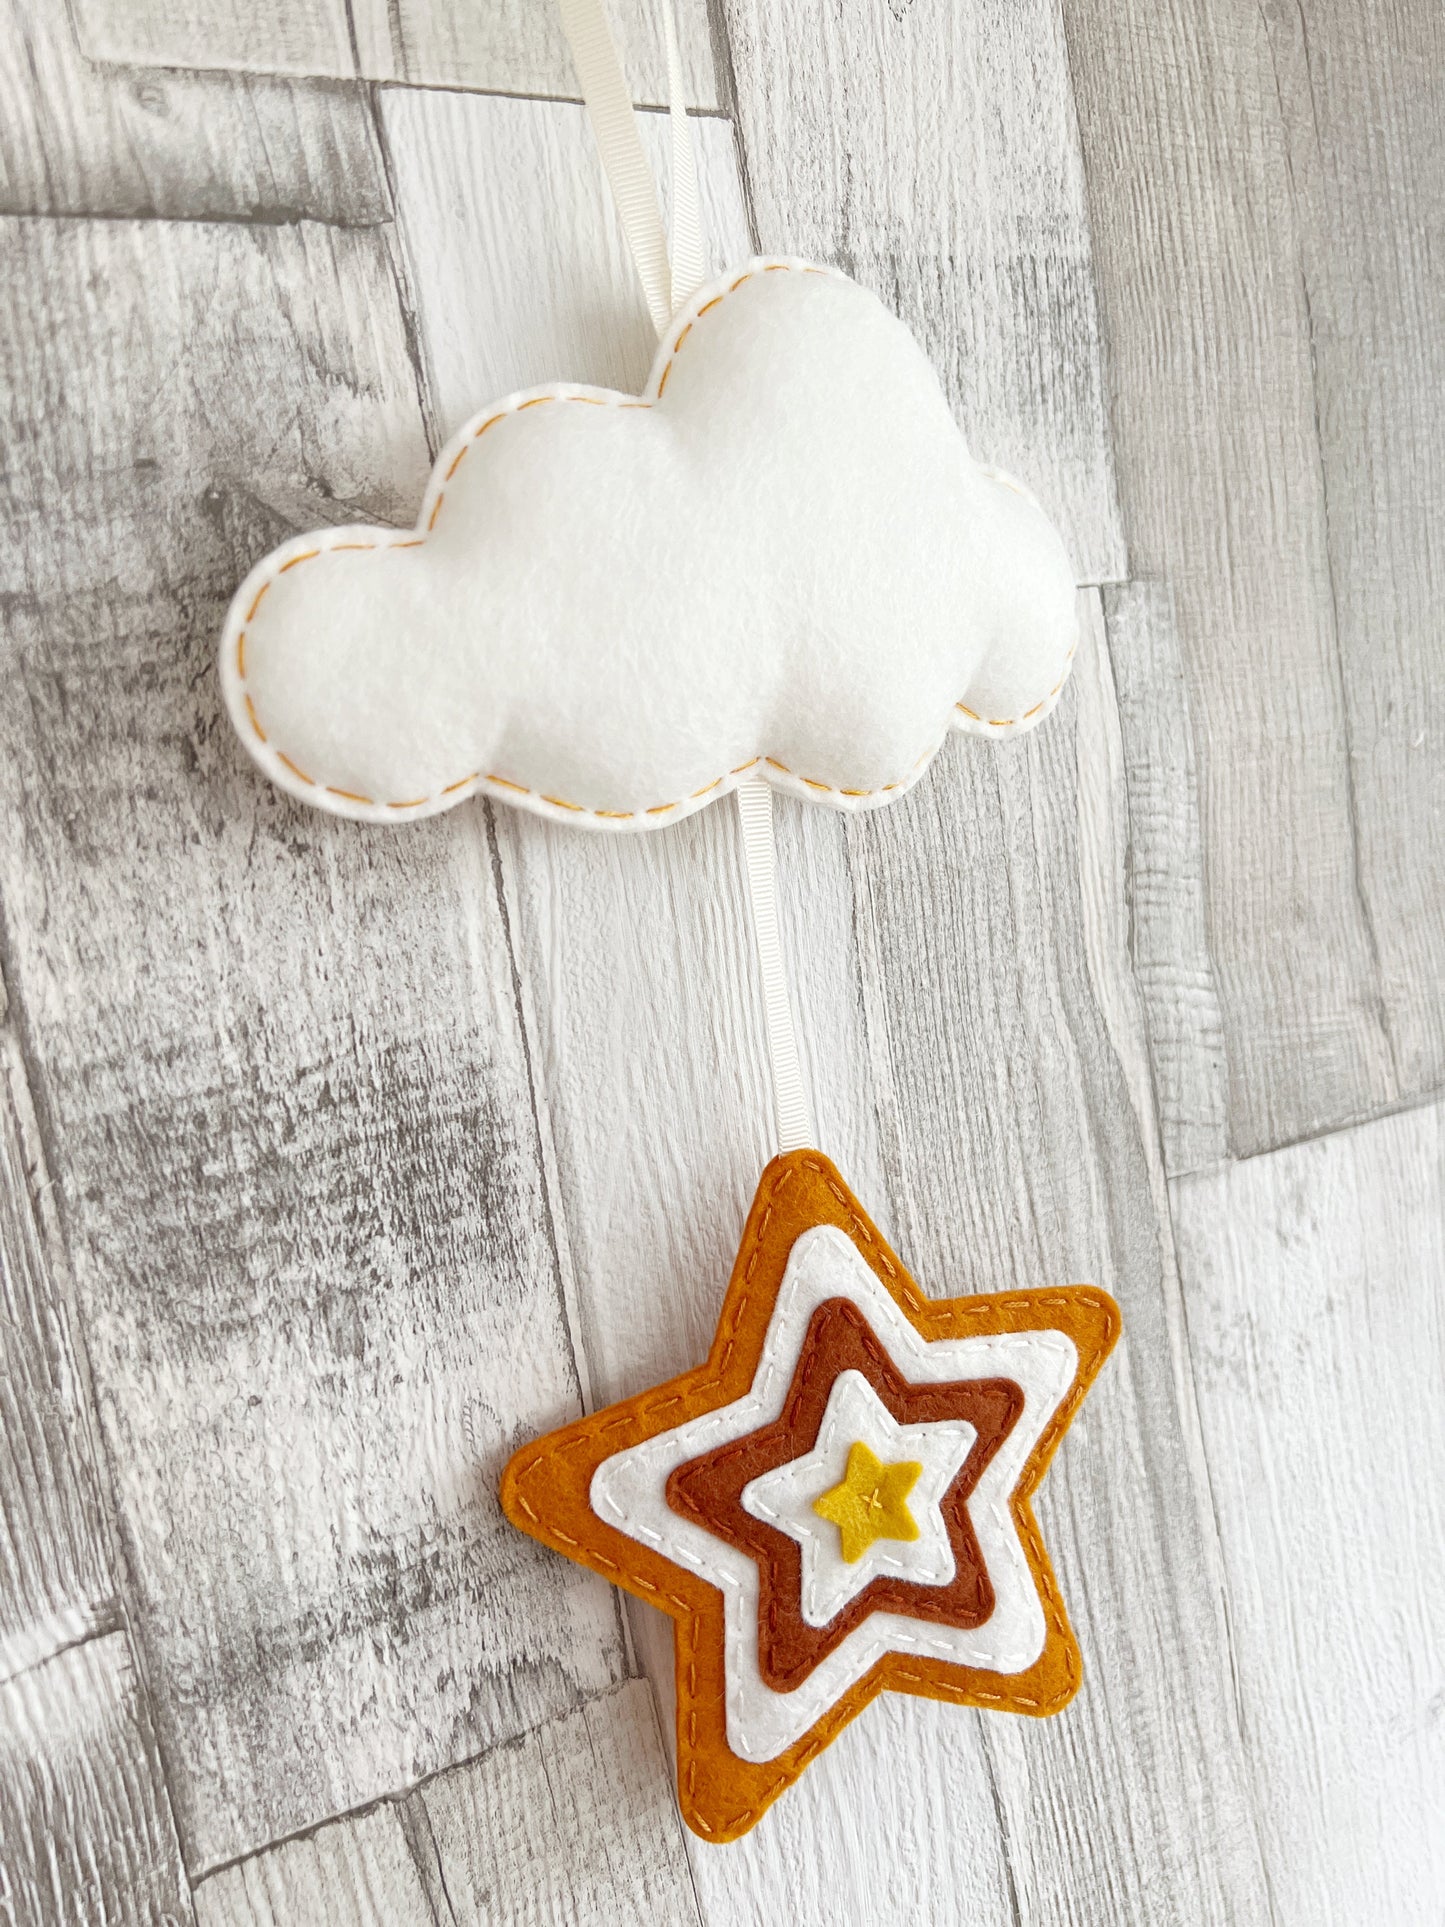 Layered Star & Cloud Wall Hanger - Rustic Tones - READY TO POST